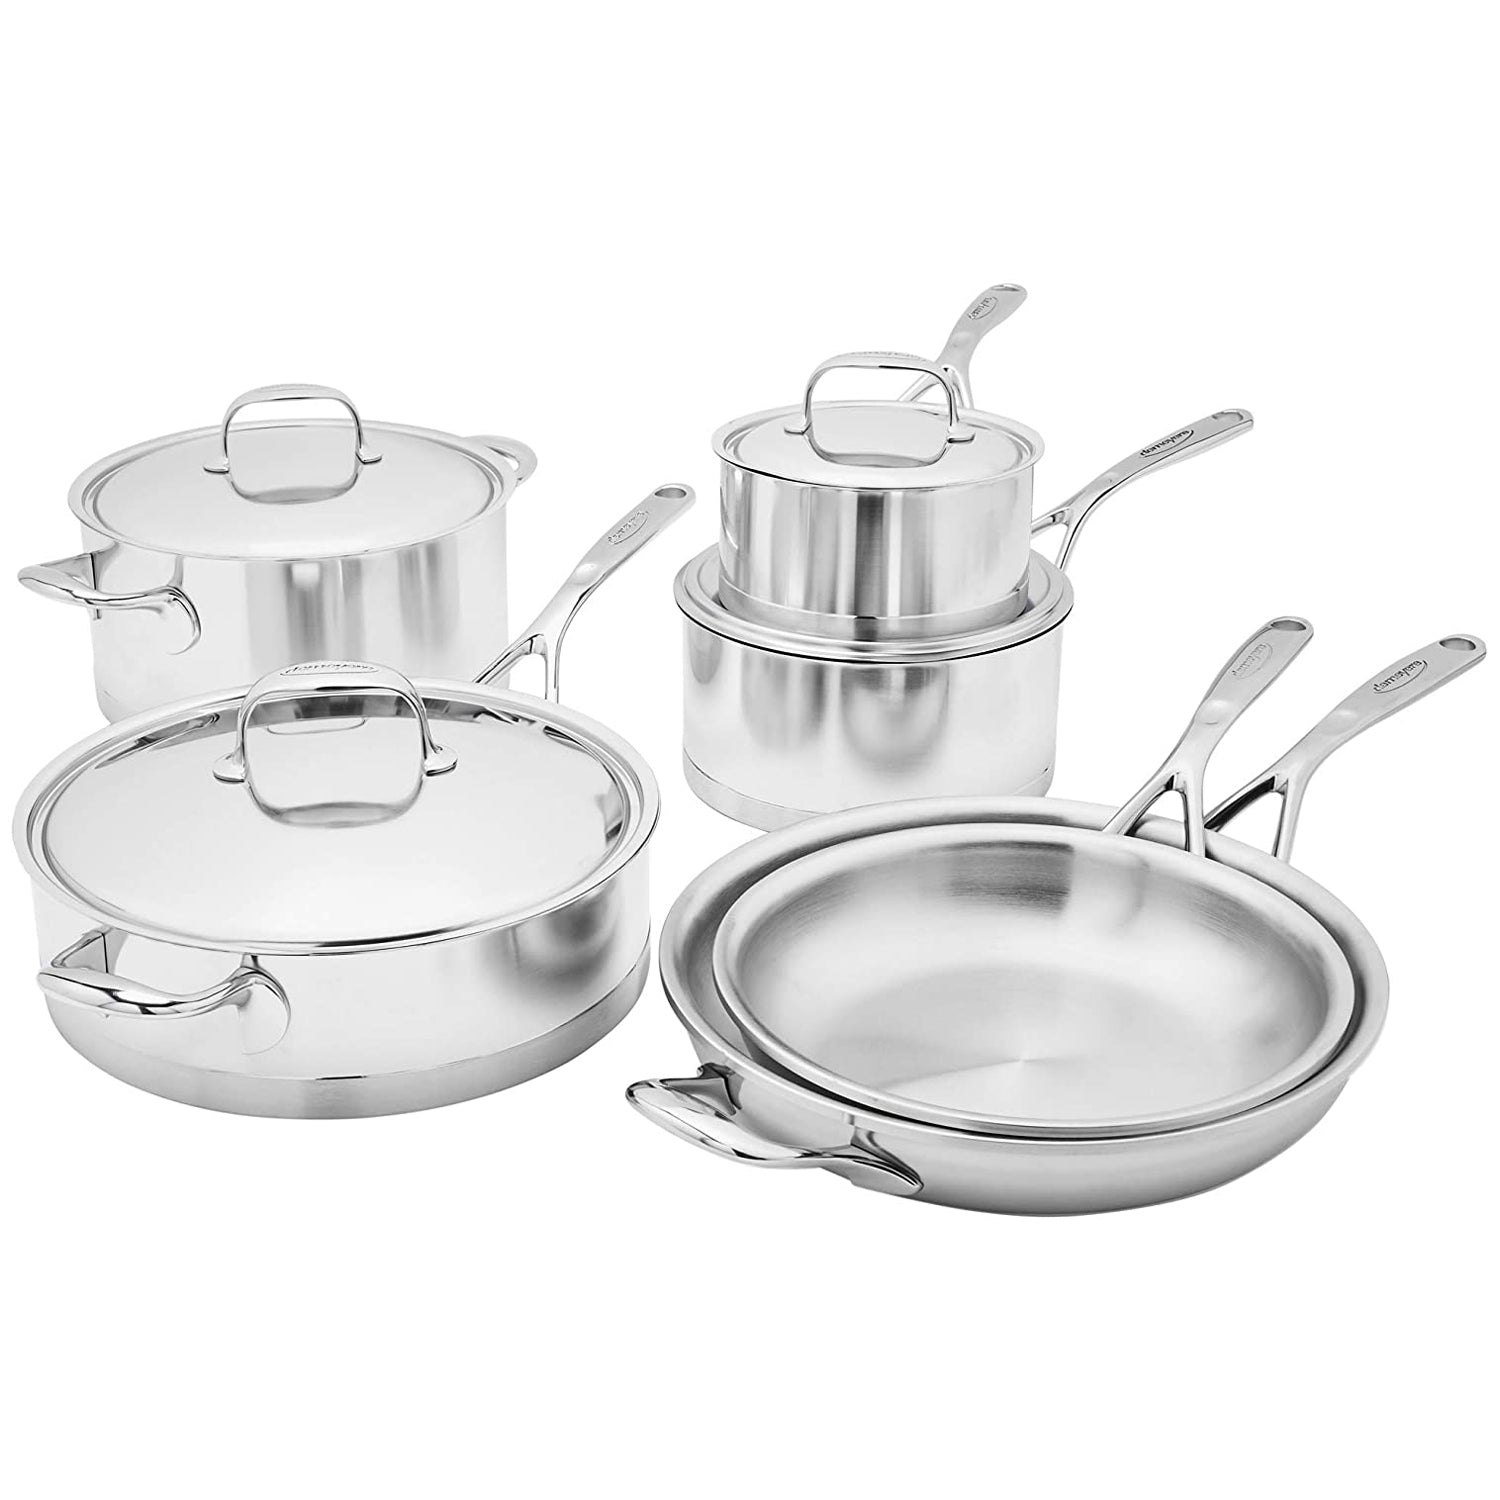 Demeyere Atlantis 3.2 qt Sauce pan with lid, 18/10 Stainless Steel